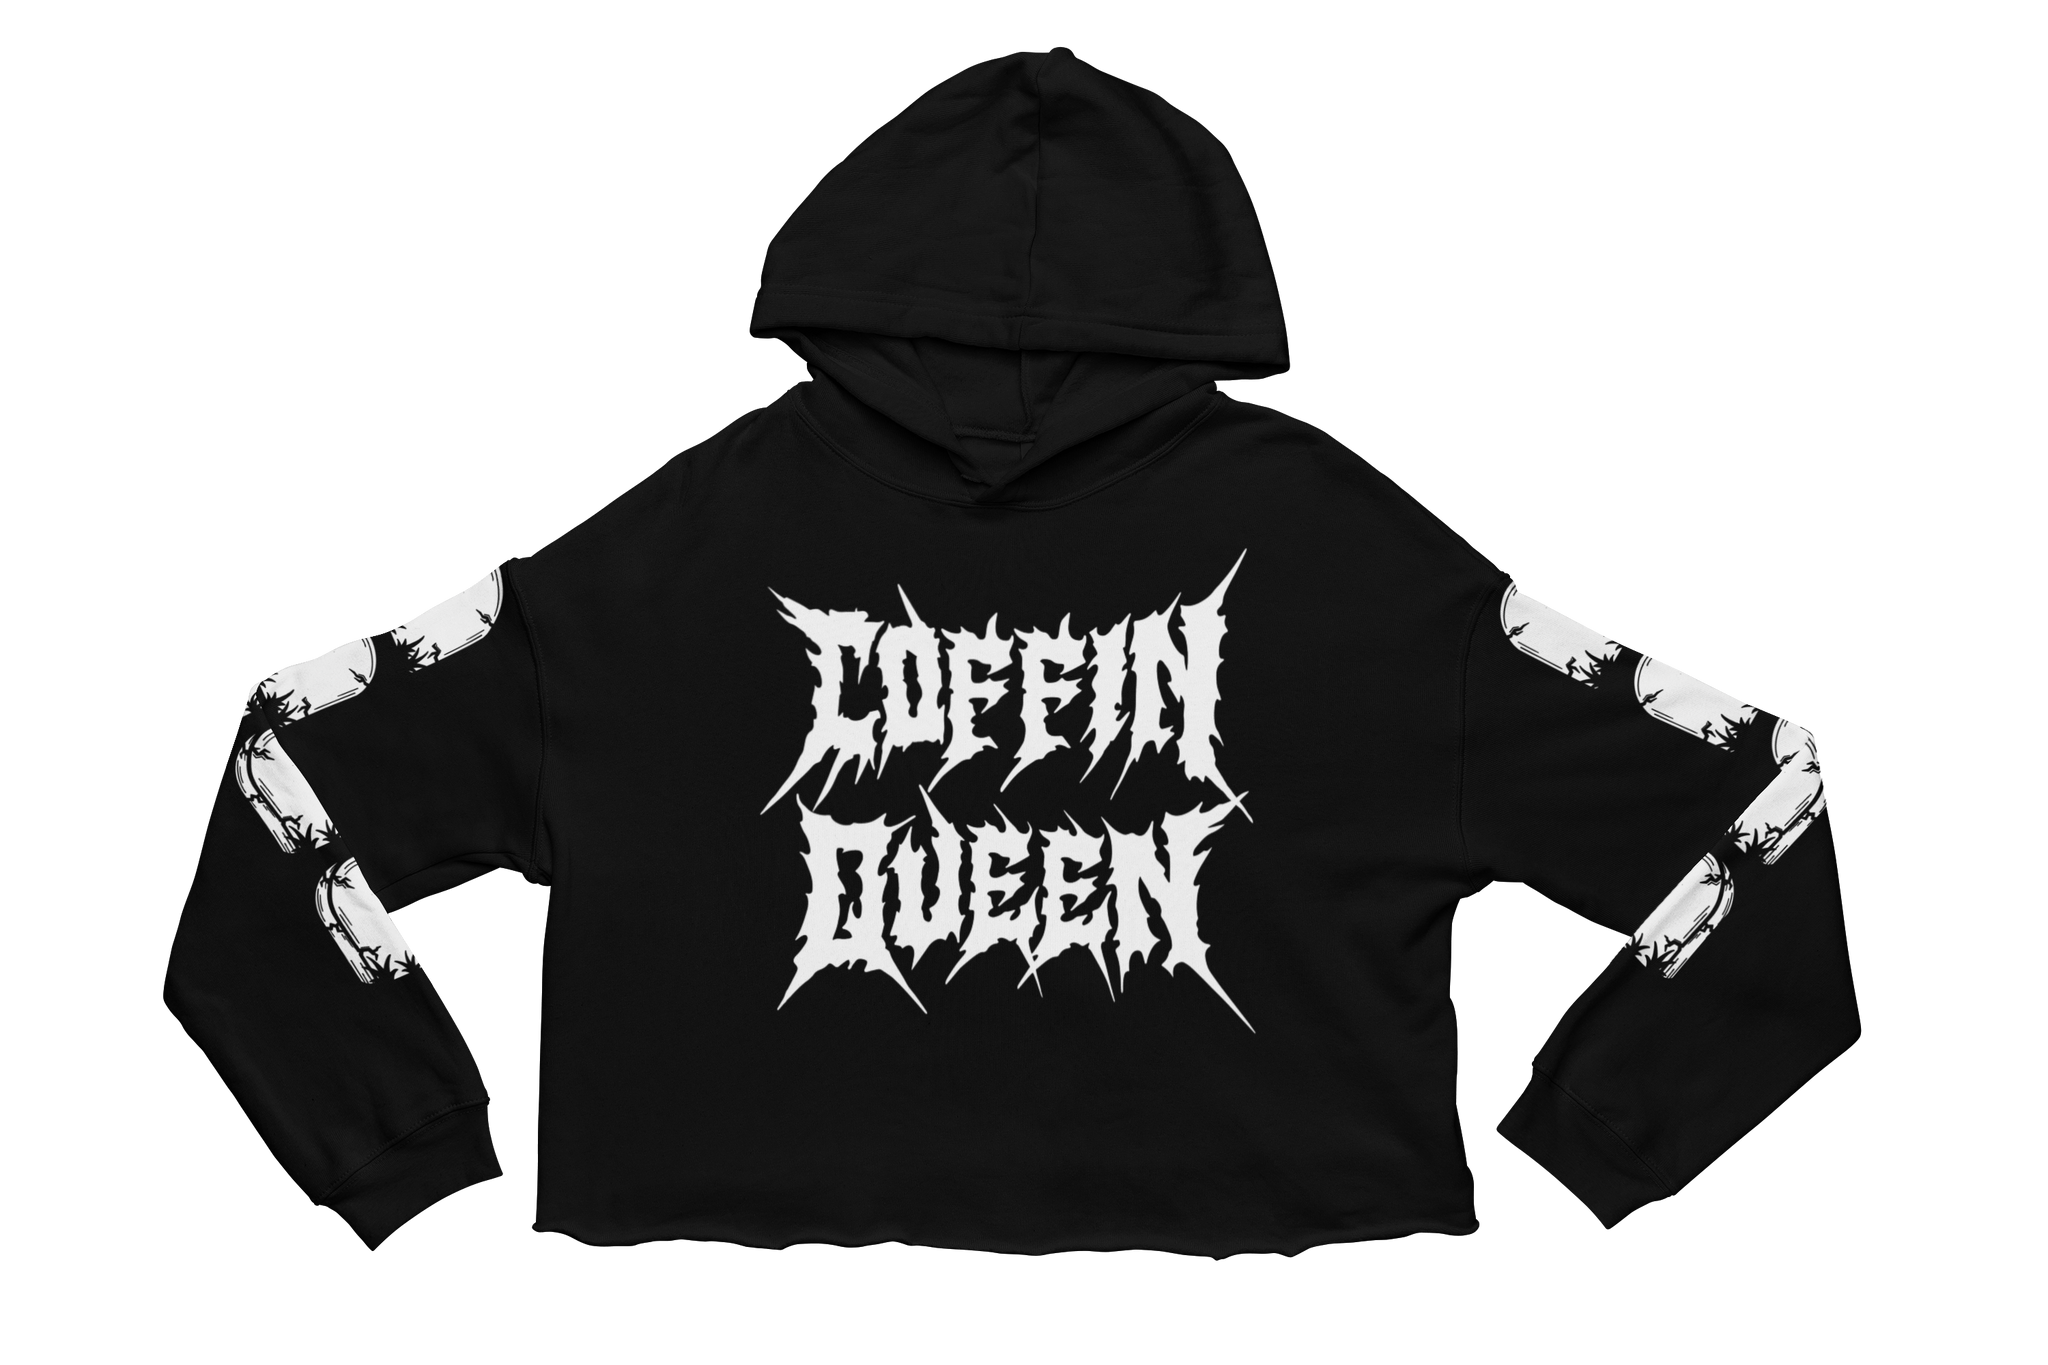 Coffin Queen Cropped Hoodie